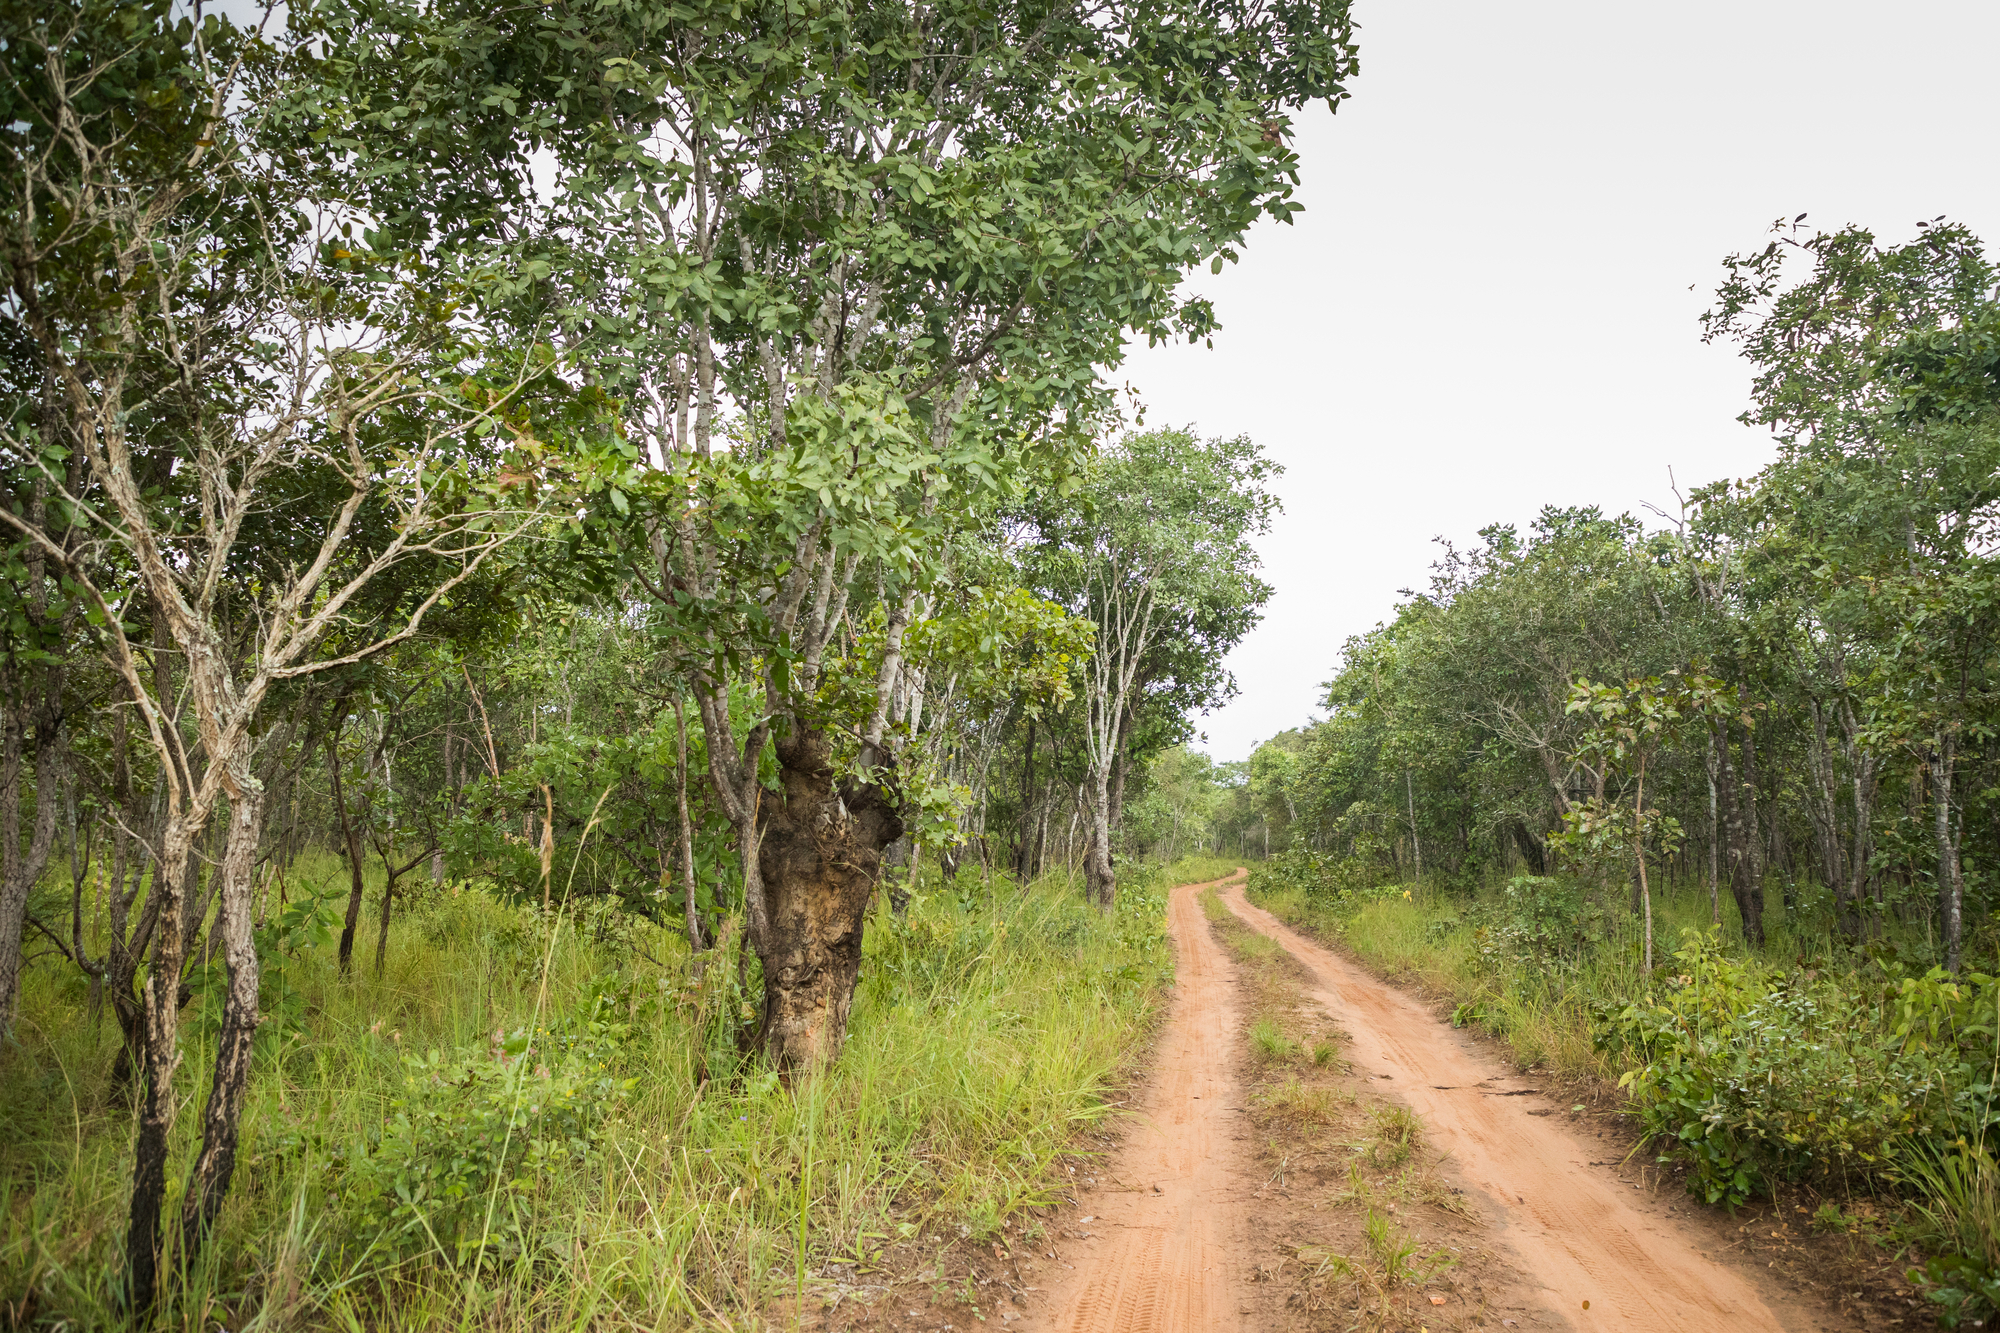 A dirt road through a rural area of Serenje District, Zambia